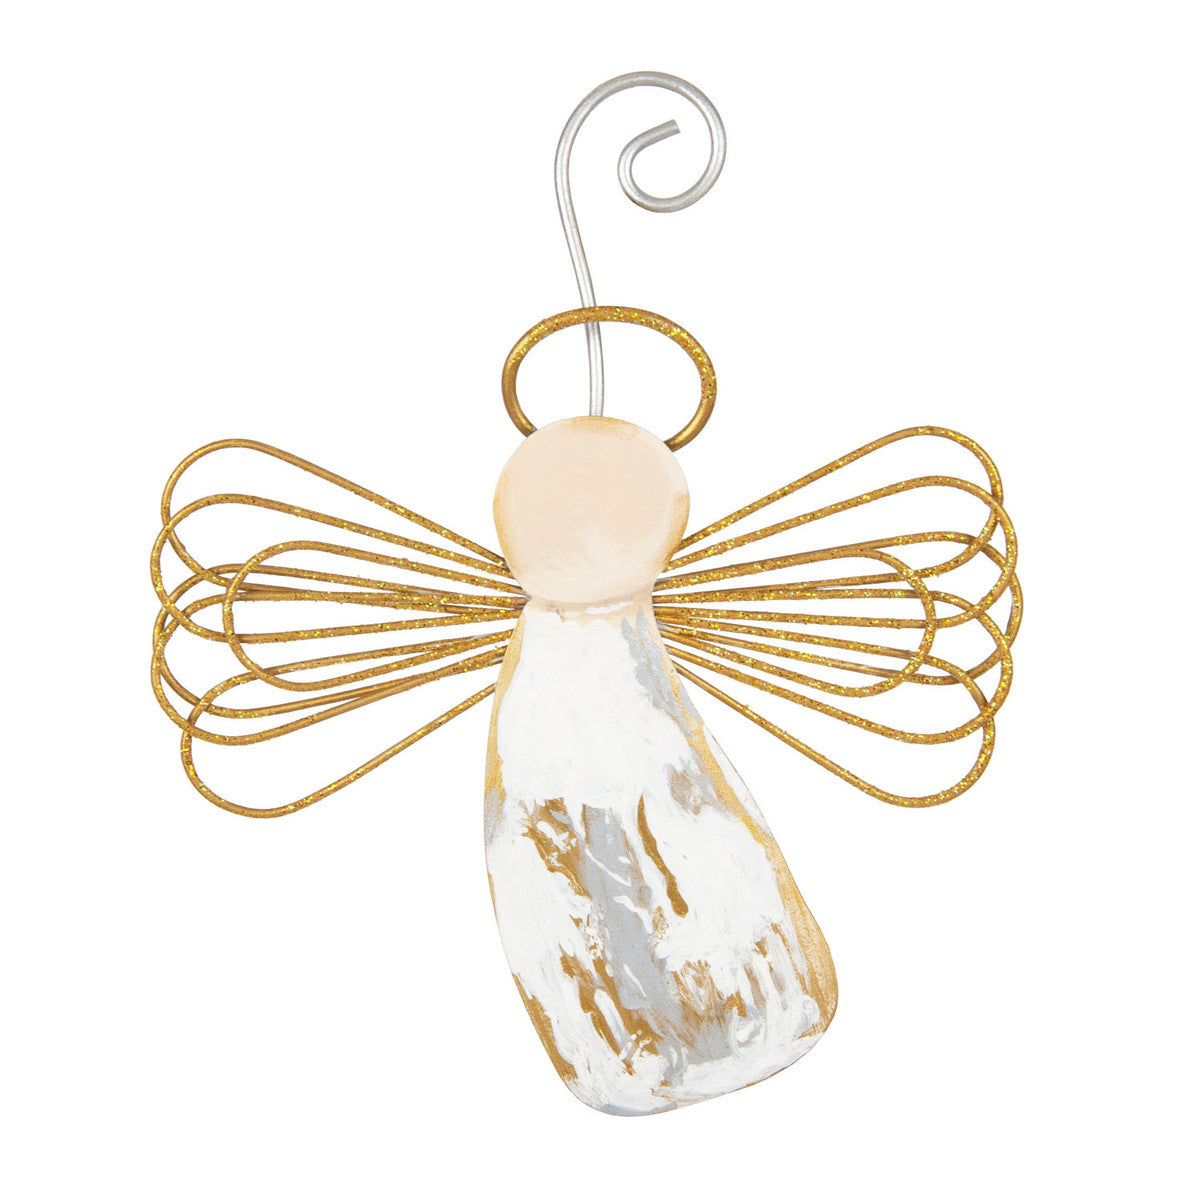 Gilded Angel Wire Wings Ornament Round Top